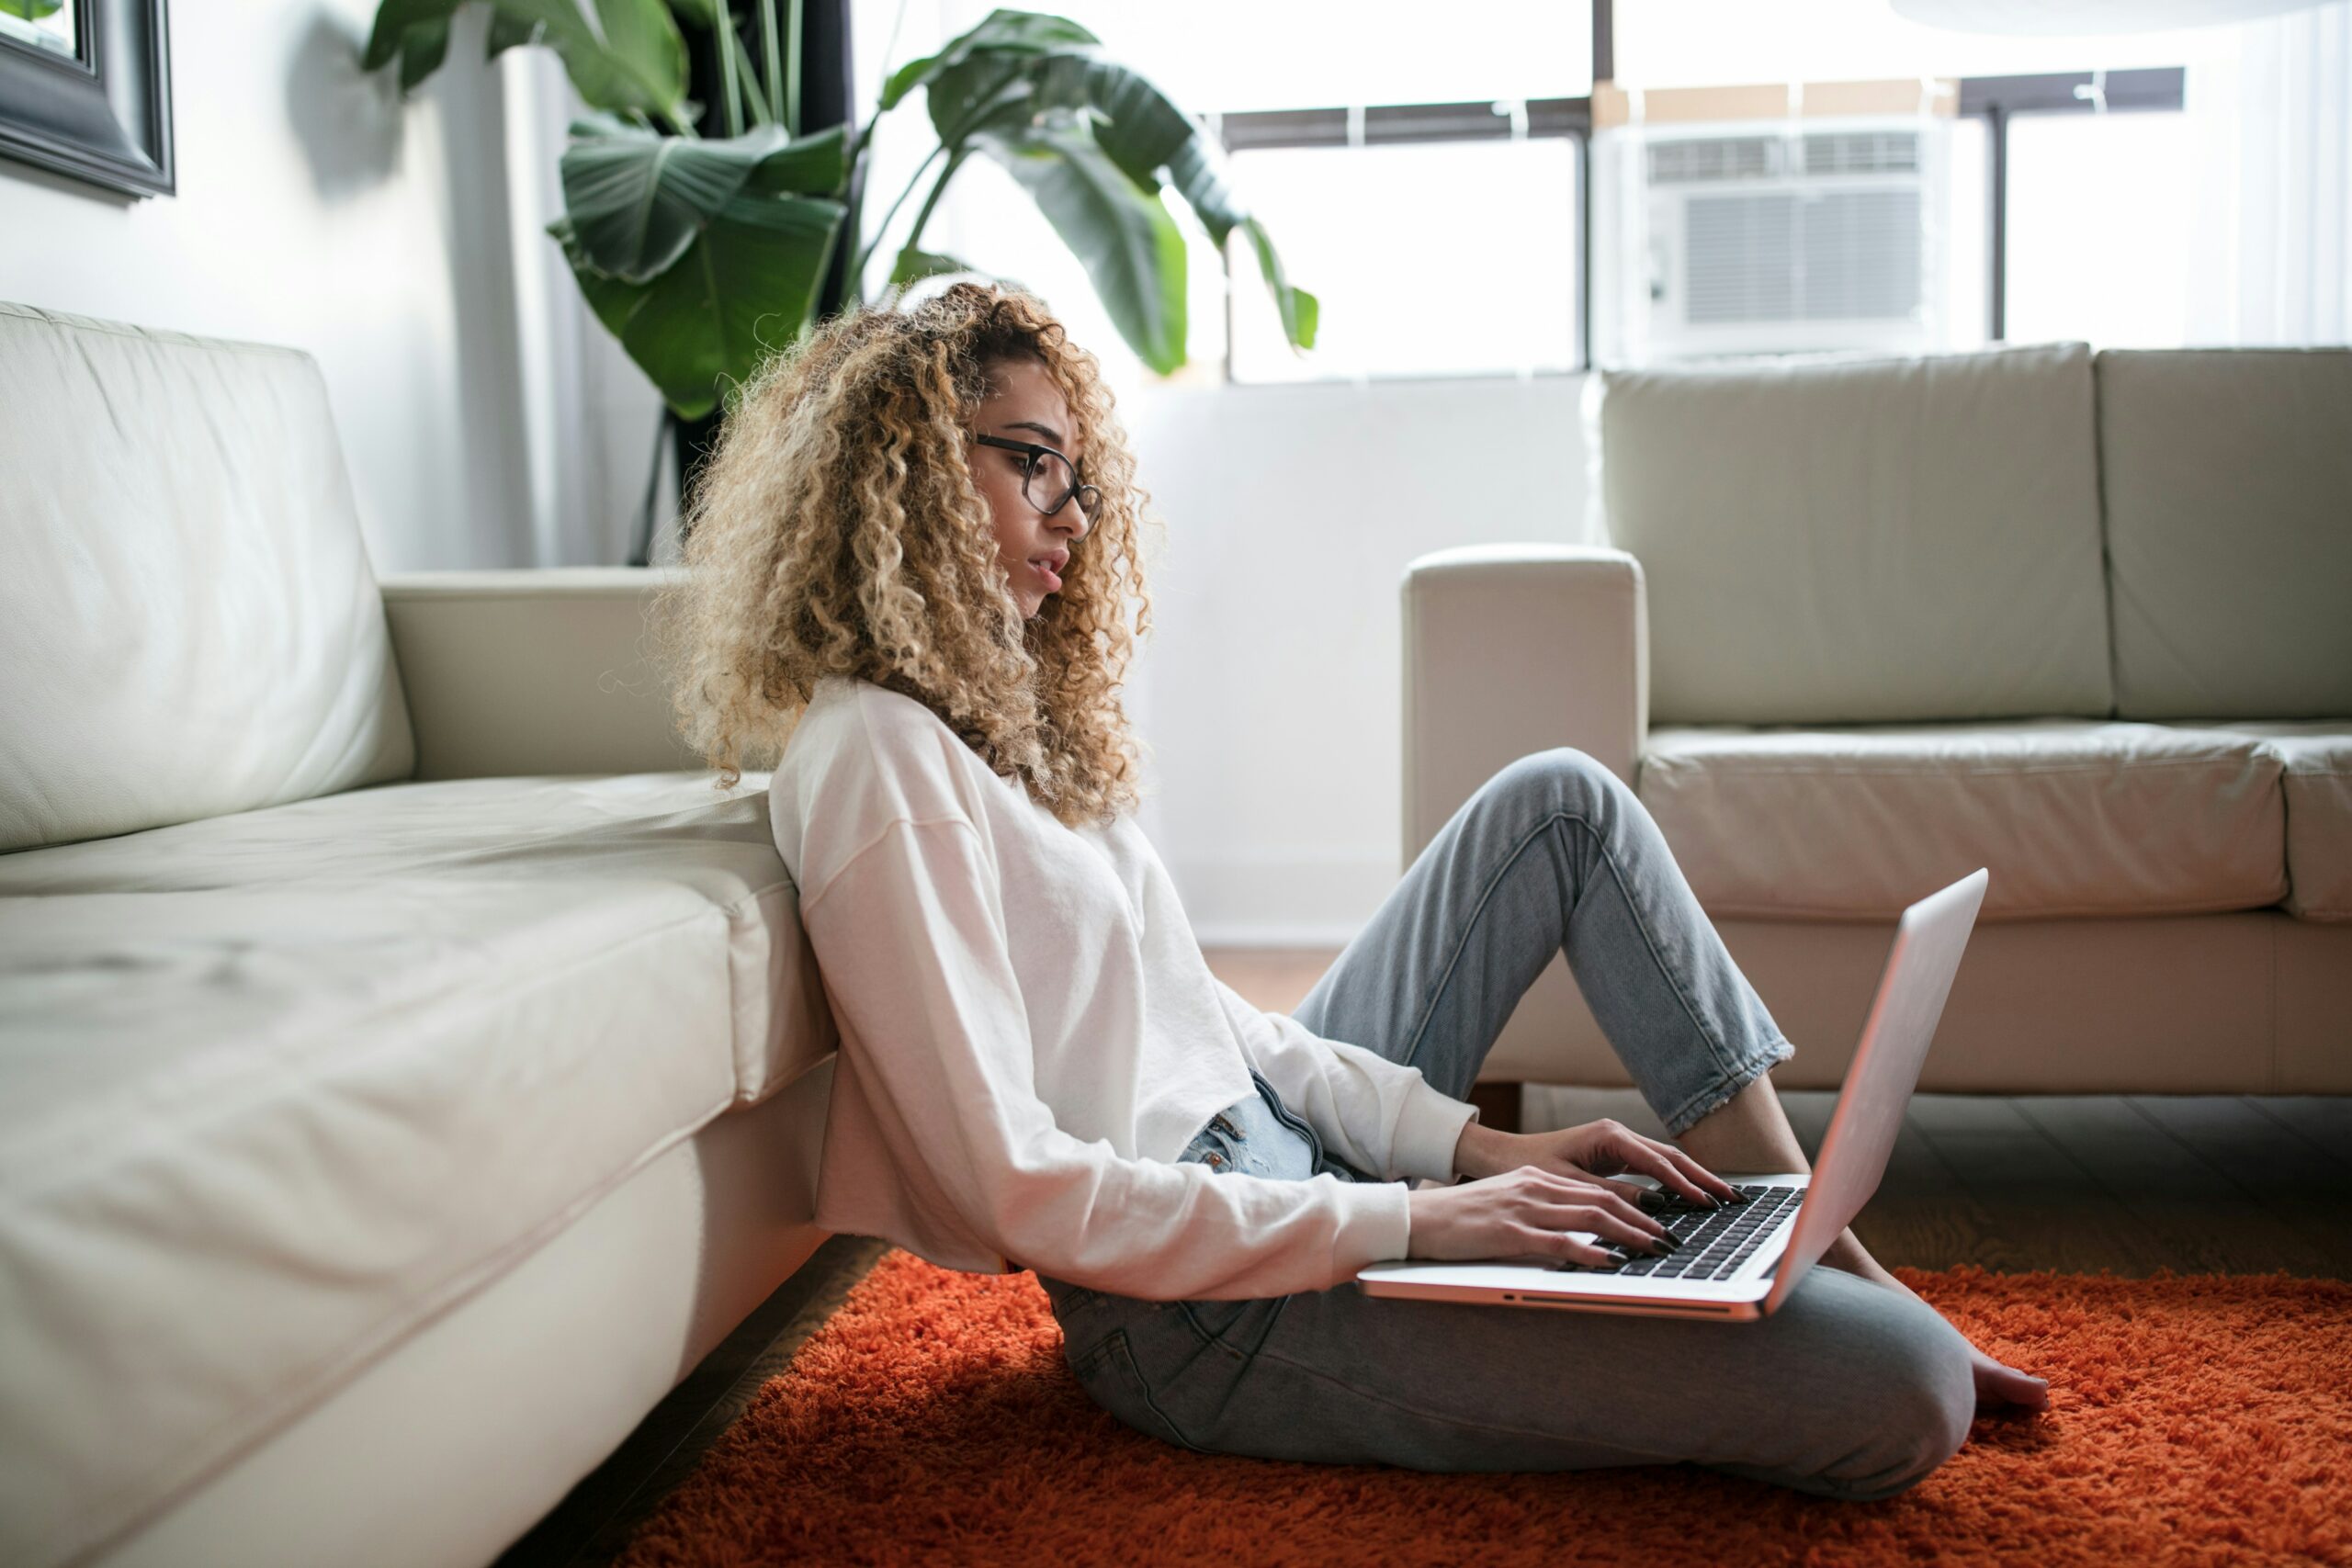 A woman sitting on a orange rug leaning against a white couch. She has curly hair and is wearing a white long sleeved shirt and jeans. She is working on a laptop computer that is resting on her leg.